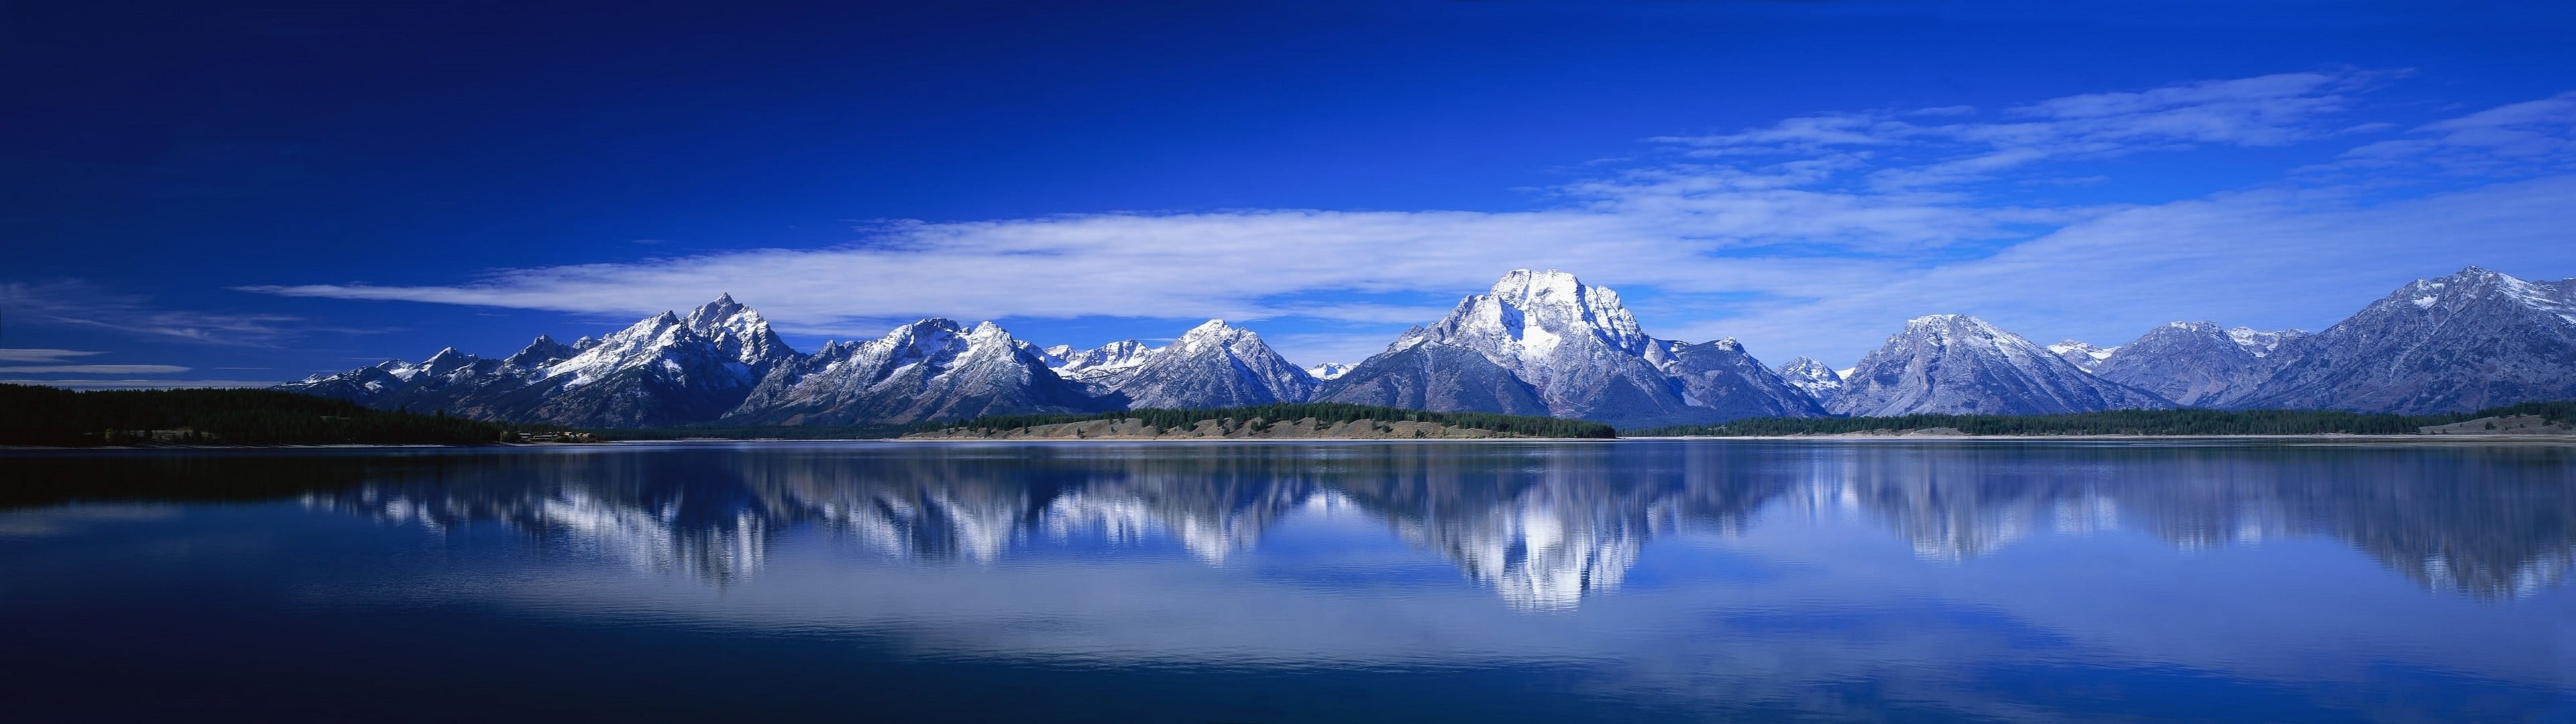 body of water and mountain alps, dual monitors, mountains, reflection